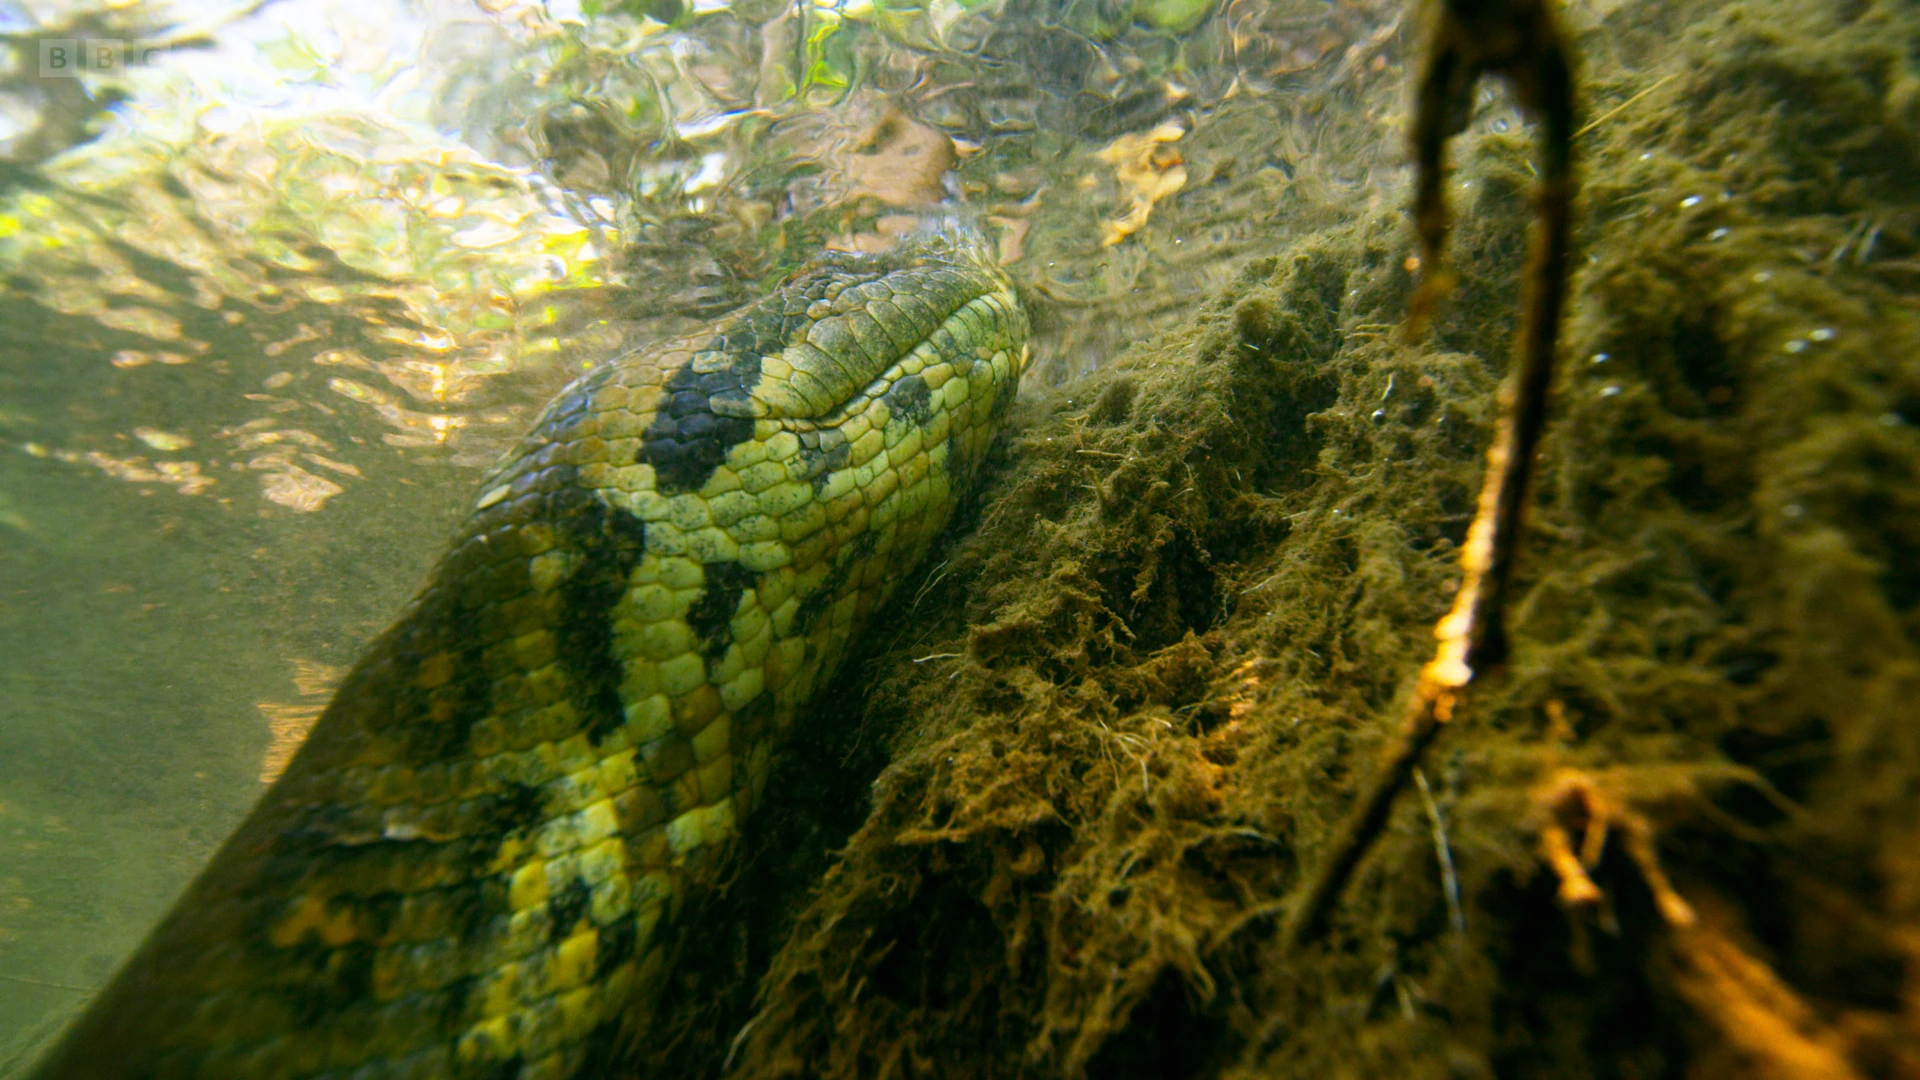 Green anaconda (Eunectes murinus) as shown in Seven Worlds, One Planet - South America